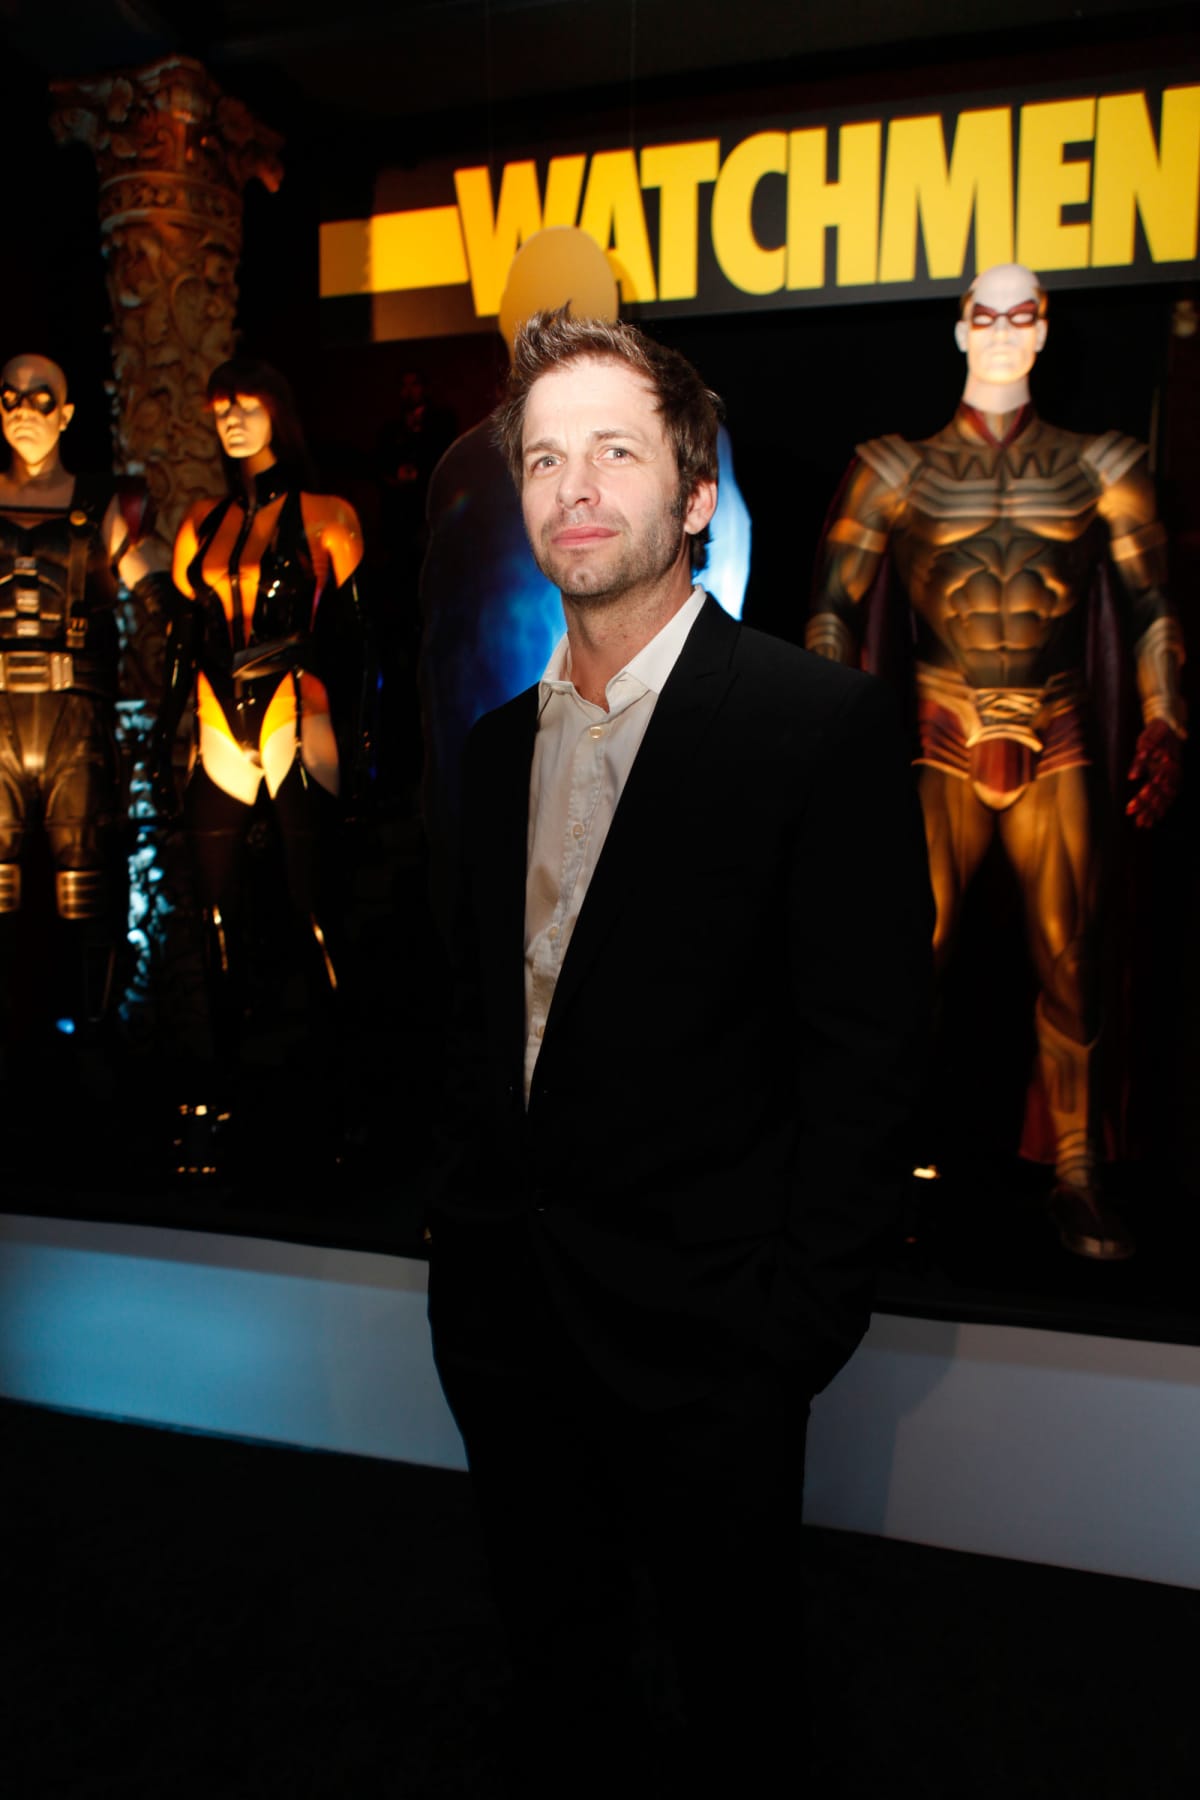 Director Zack Snyder attends the after party of the Los Angeles premiere of "Watchmen" at Grauman's Chinese Theatre on March 2, 2009 in Hollywood, California.